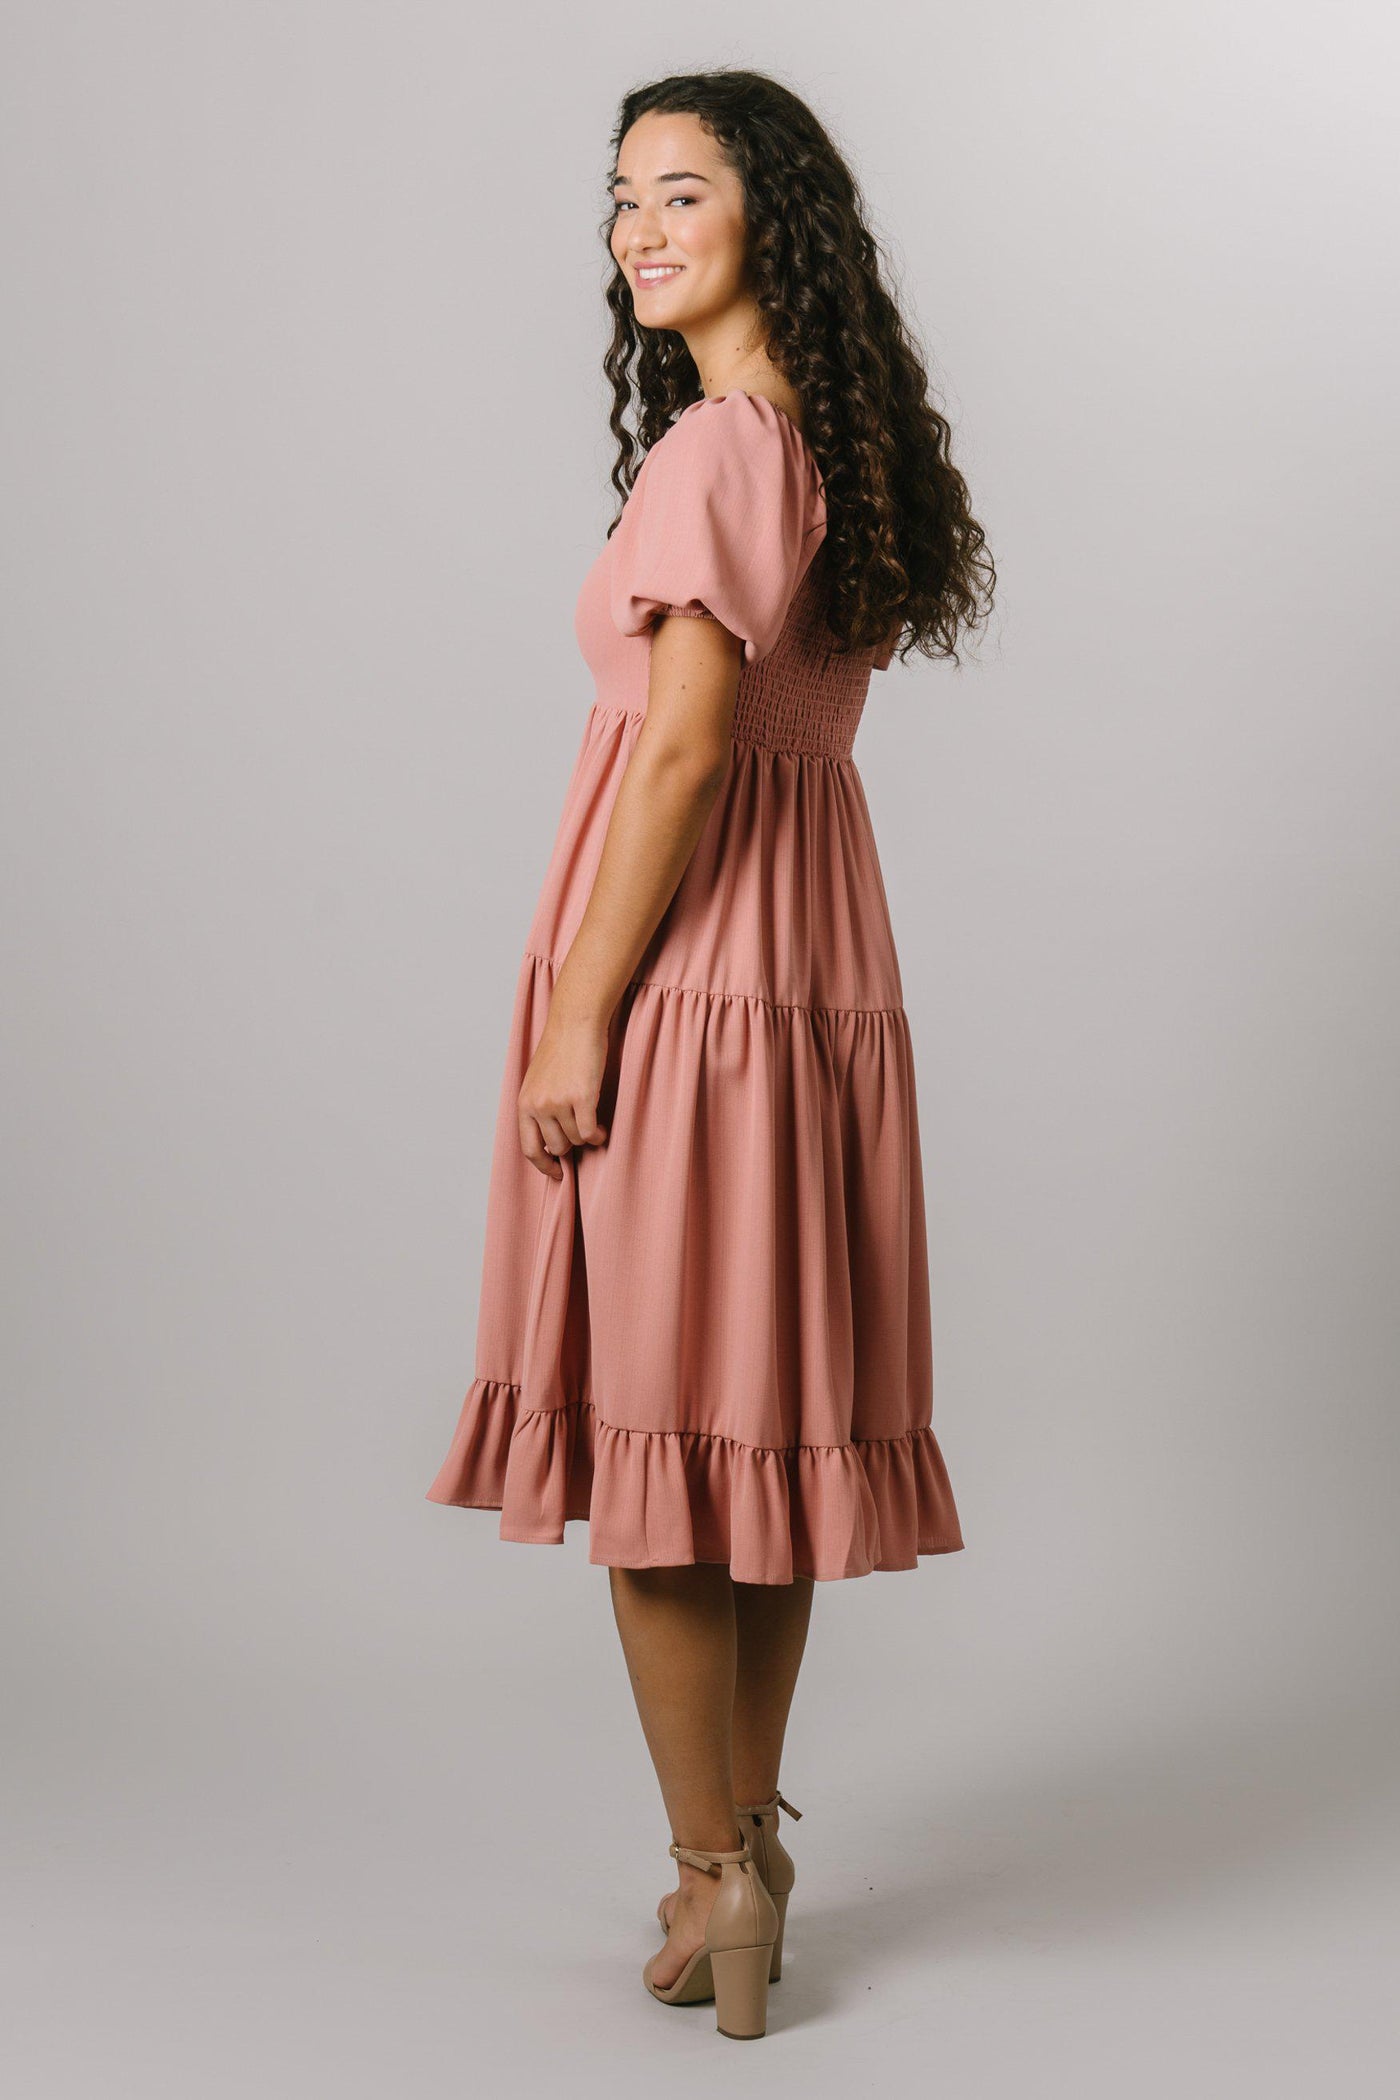 Our modest, smocked, tiered midi dress with a square neckline and 3/4 length puff sleeves in canyon rose. Modest Dresses - Everyday Modest Dresses - Bridesmaid Modest Dresses. 